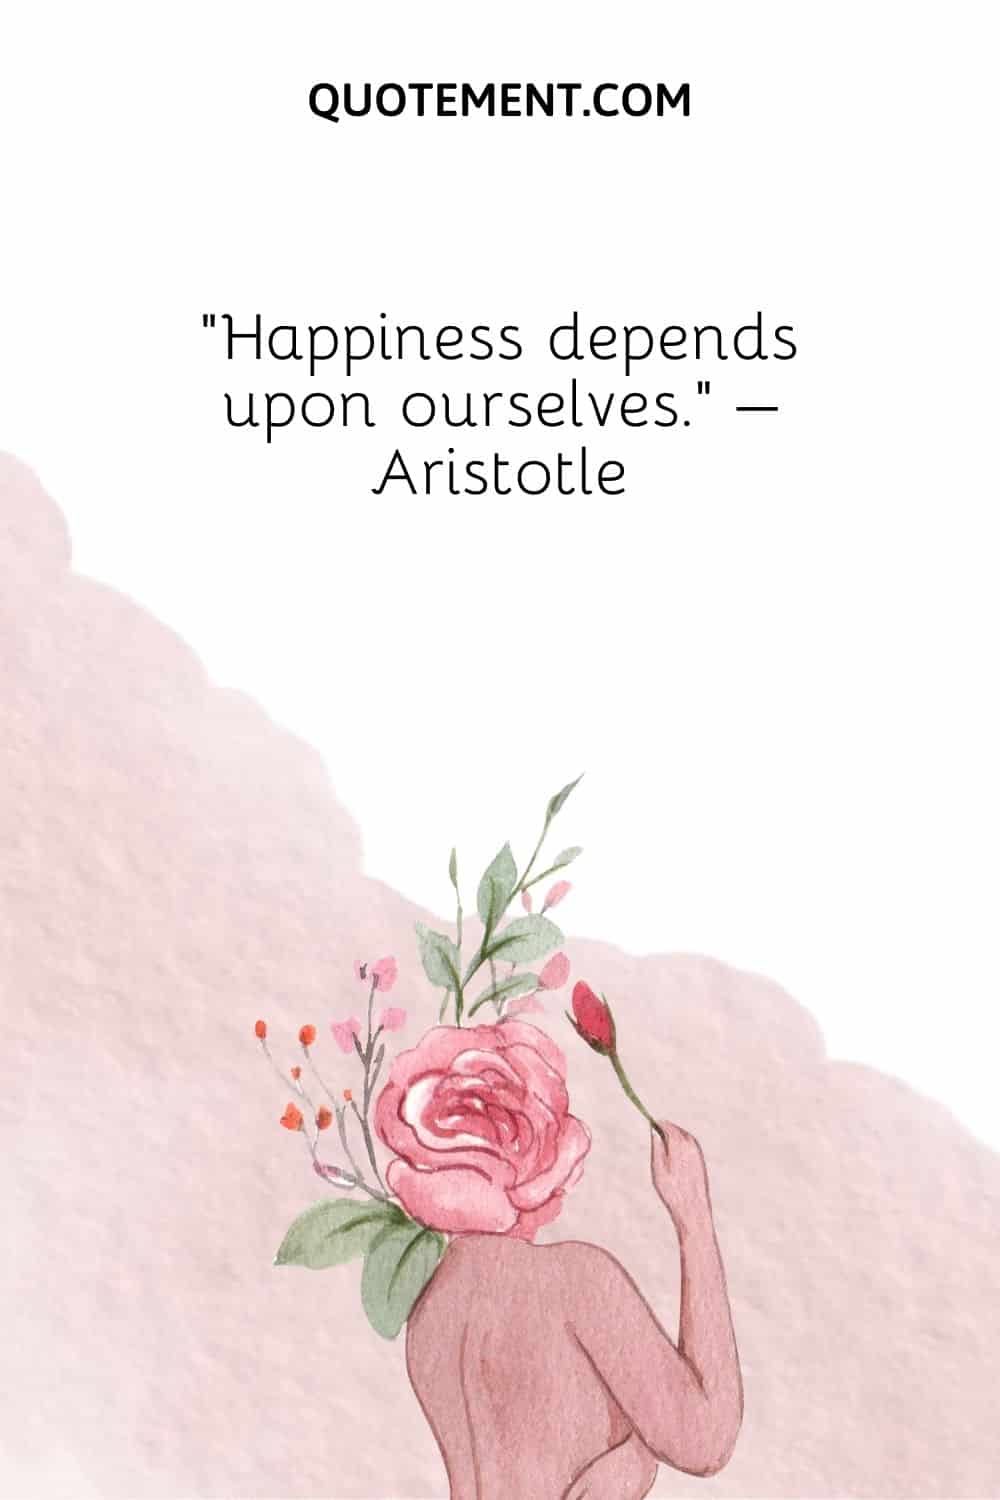 Happiness depends upon ourselves. – Aristotle